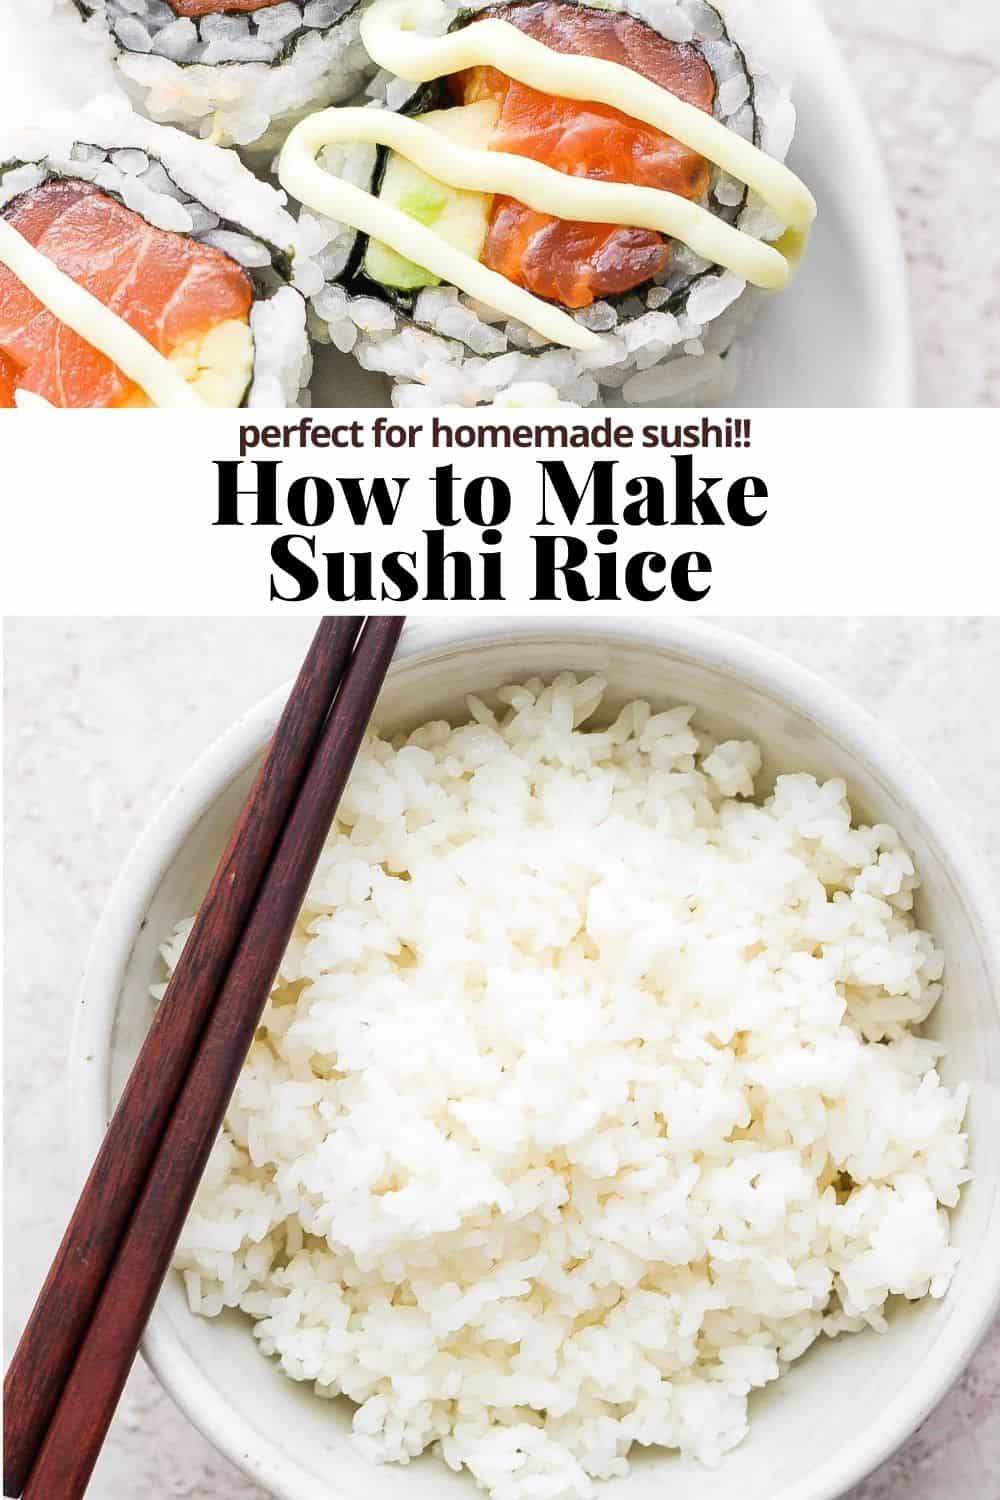 Pinterest image for how to make sushi rice.